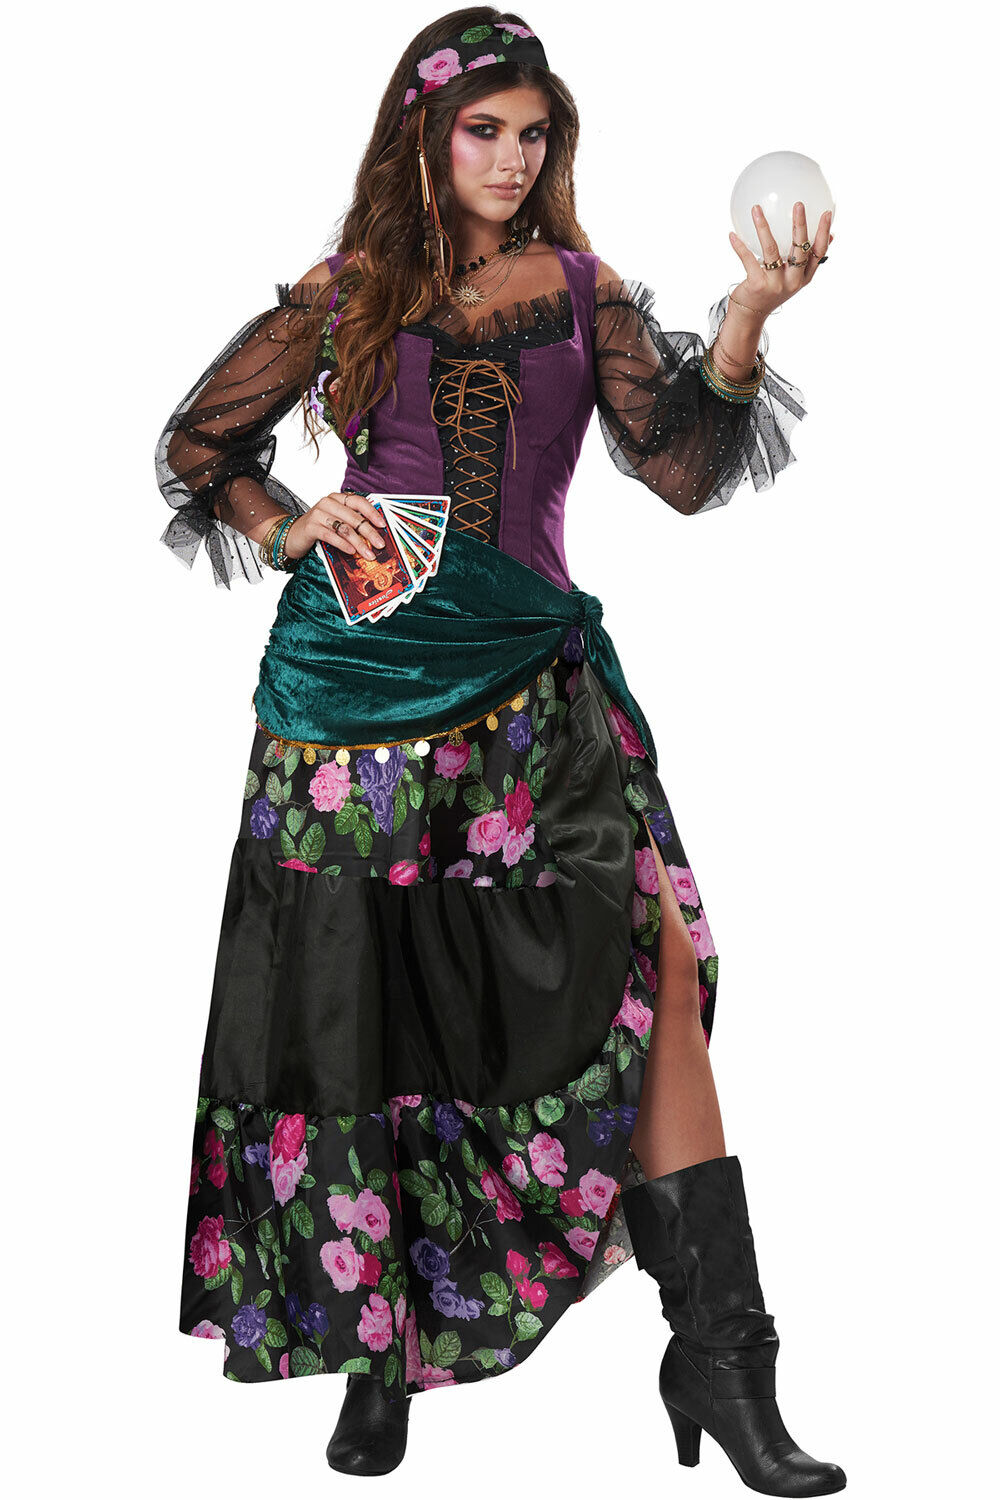 California Costume Adult Women Gypsy Fortune Teller halloween outfit 01108